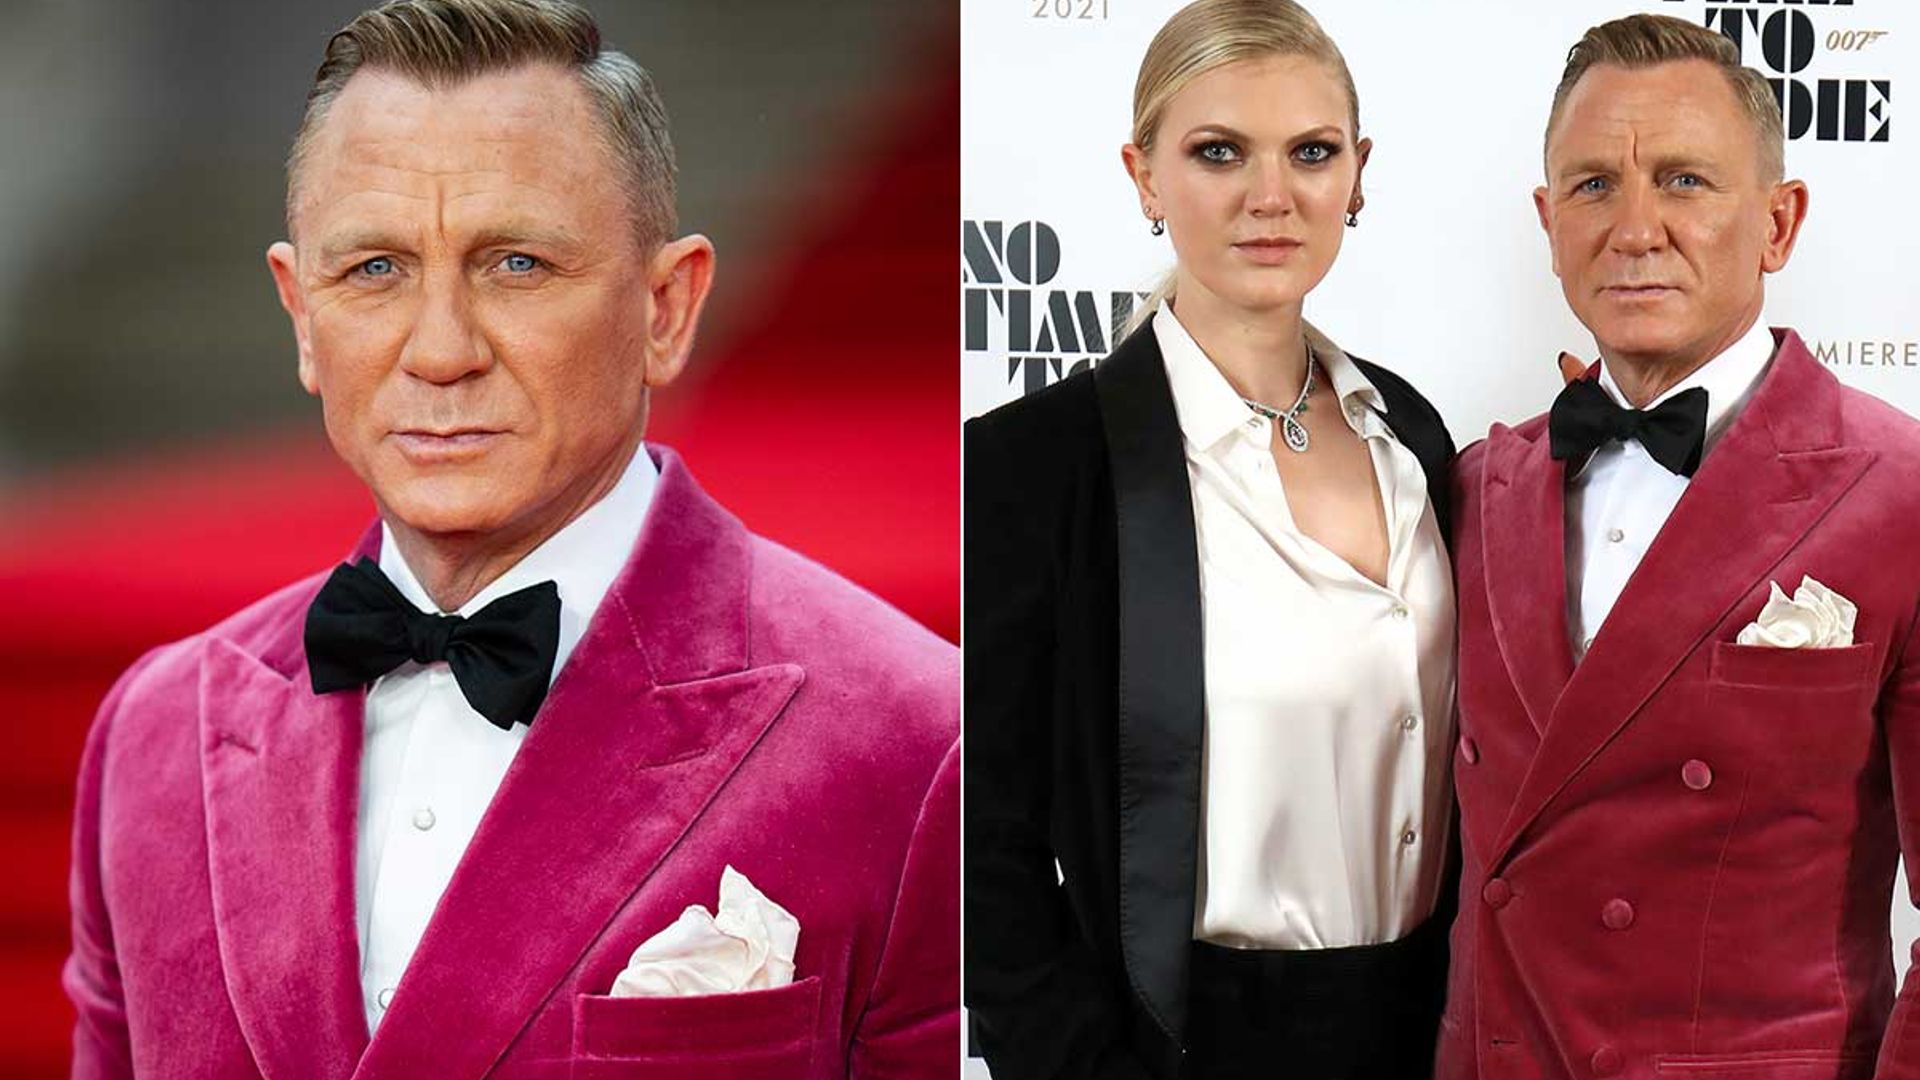 Daniel Craig makes extremely rare appearance with his daughter Ella at No Time To Die premiere